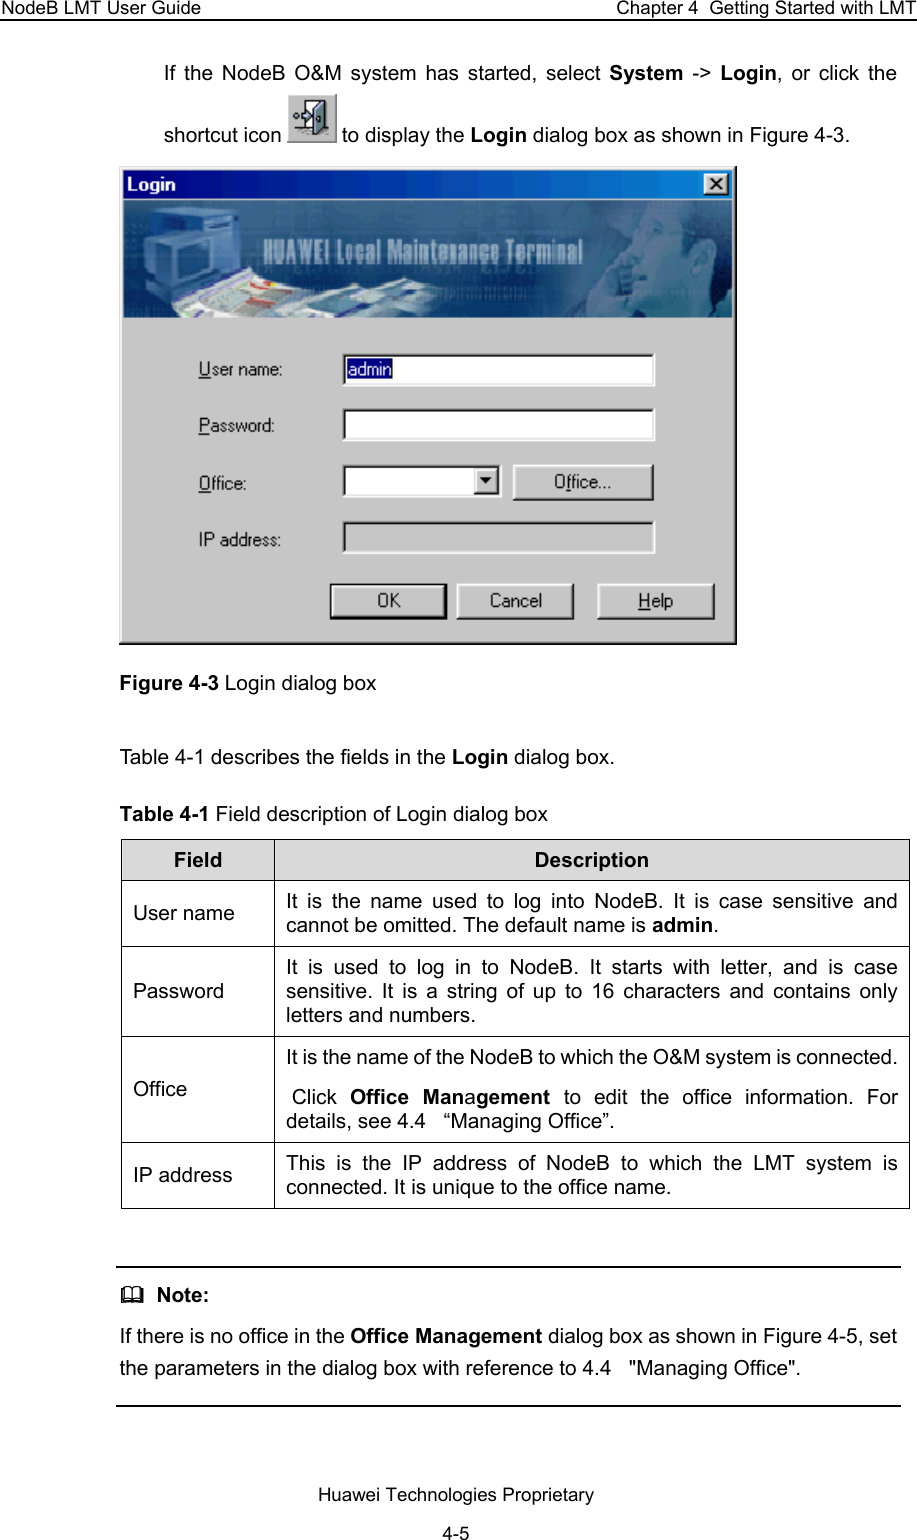 NodeB LMT User Guide  Chapter 4  Getting Started with LMT If the NodeB O&amp;M system has started, select System -&gt; Login, or click the shortcut icon   to display the Login dialog box as shown in Figure 4-3.  Figure 4-3 Login dialog box Table 4-1 describes the fields in the Login dialog box.  Table 4-1 Field description of Login dialog box Field   Description  User name  It is the name used to log into NodeB. It is case sensitive and cannot be omitted. The default name is admin. Password  It is used to log in to NodeB. It starts with letter, and is case sensitive. It is a string of up to 16 characters and contains only letters and numbers.  Office  It is the name of the NodeB to which the O&amp;M system is connected.  Click  Office Management  to edit the office information. For details, see 4.4   “Managing Office”.  IP address   This is the IP address of NodeB to which the LMT system is connected. It is unique to the office name.    Note:  If there is no office in the Office Management dialog box as shown in Figure 4-5, set the parameters in the dialog box with reference to 4.4   &quot;Managing Office&quot;.  Huawei Technologies Proprietary 4-5 